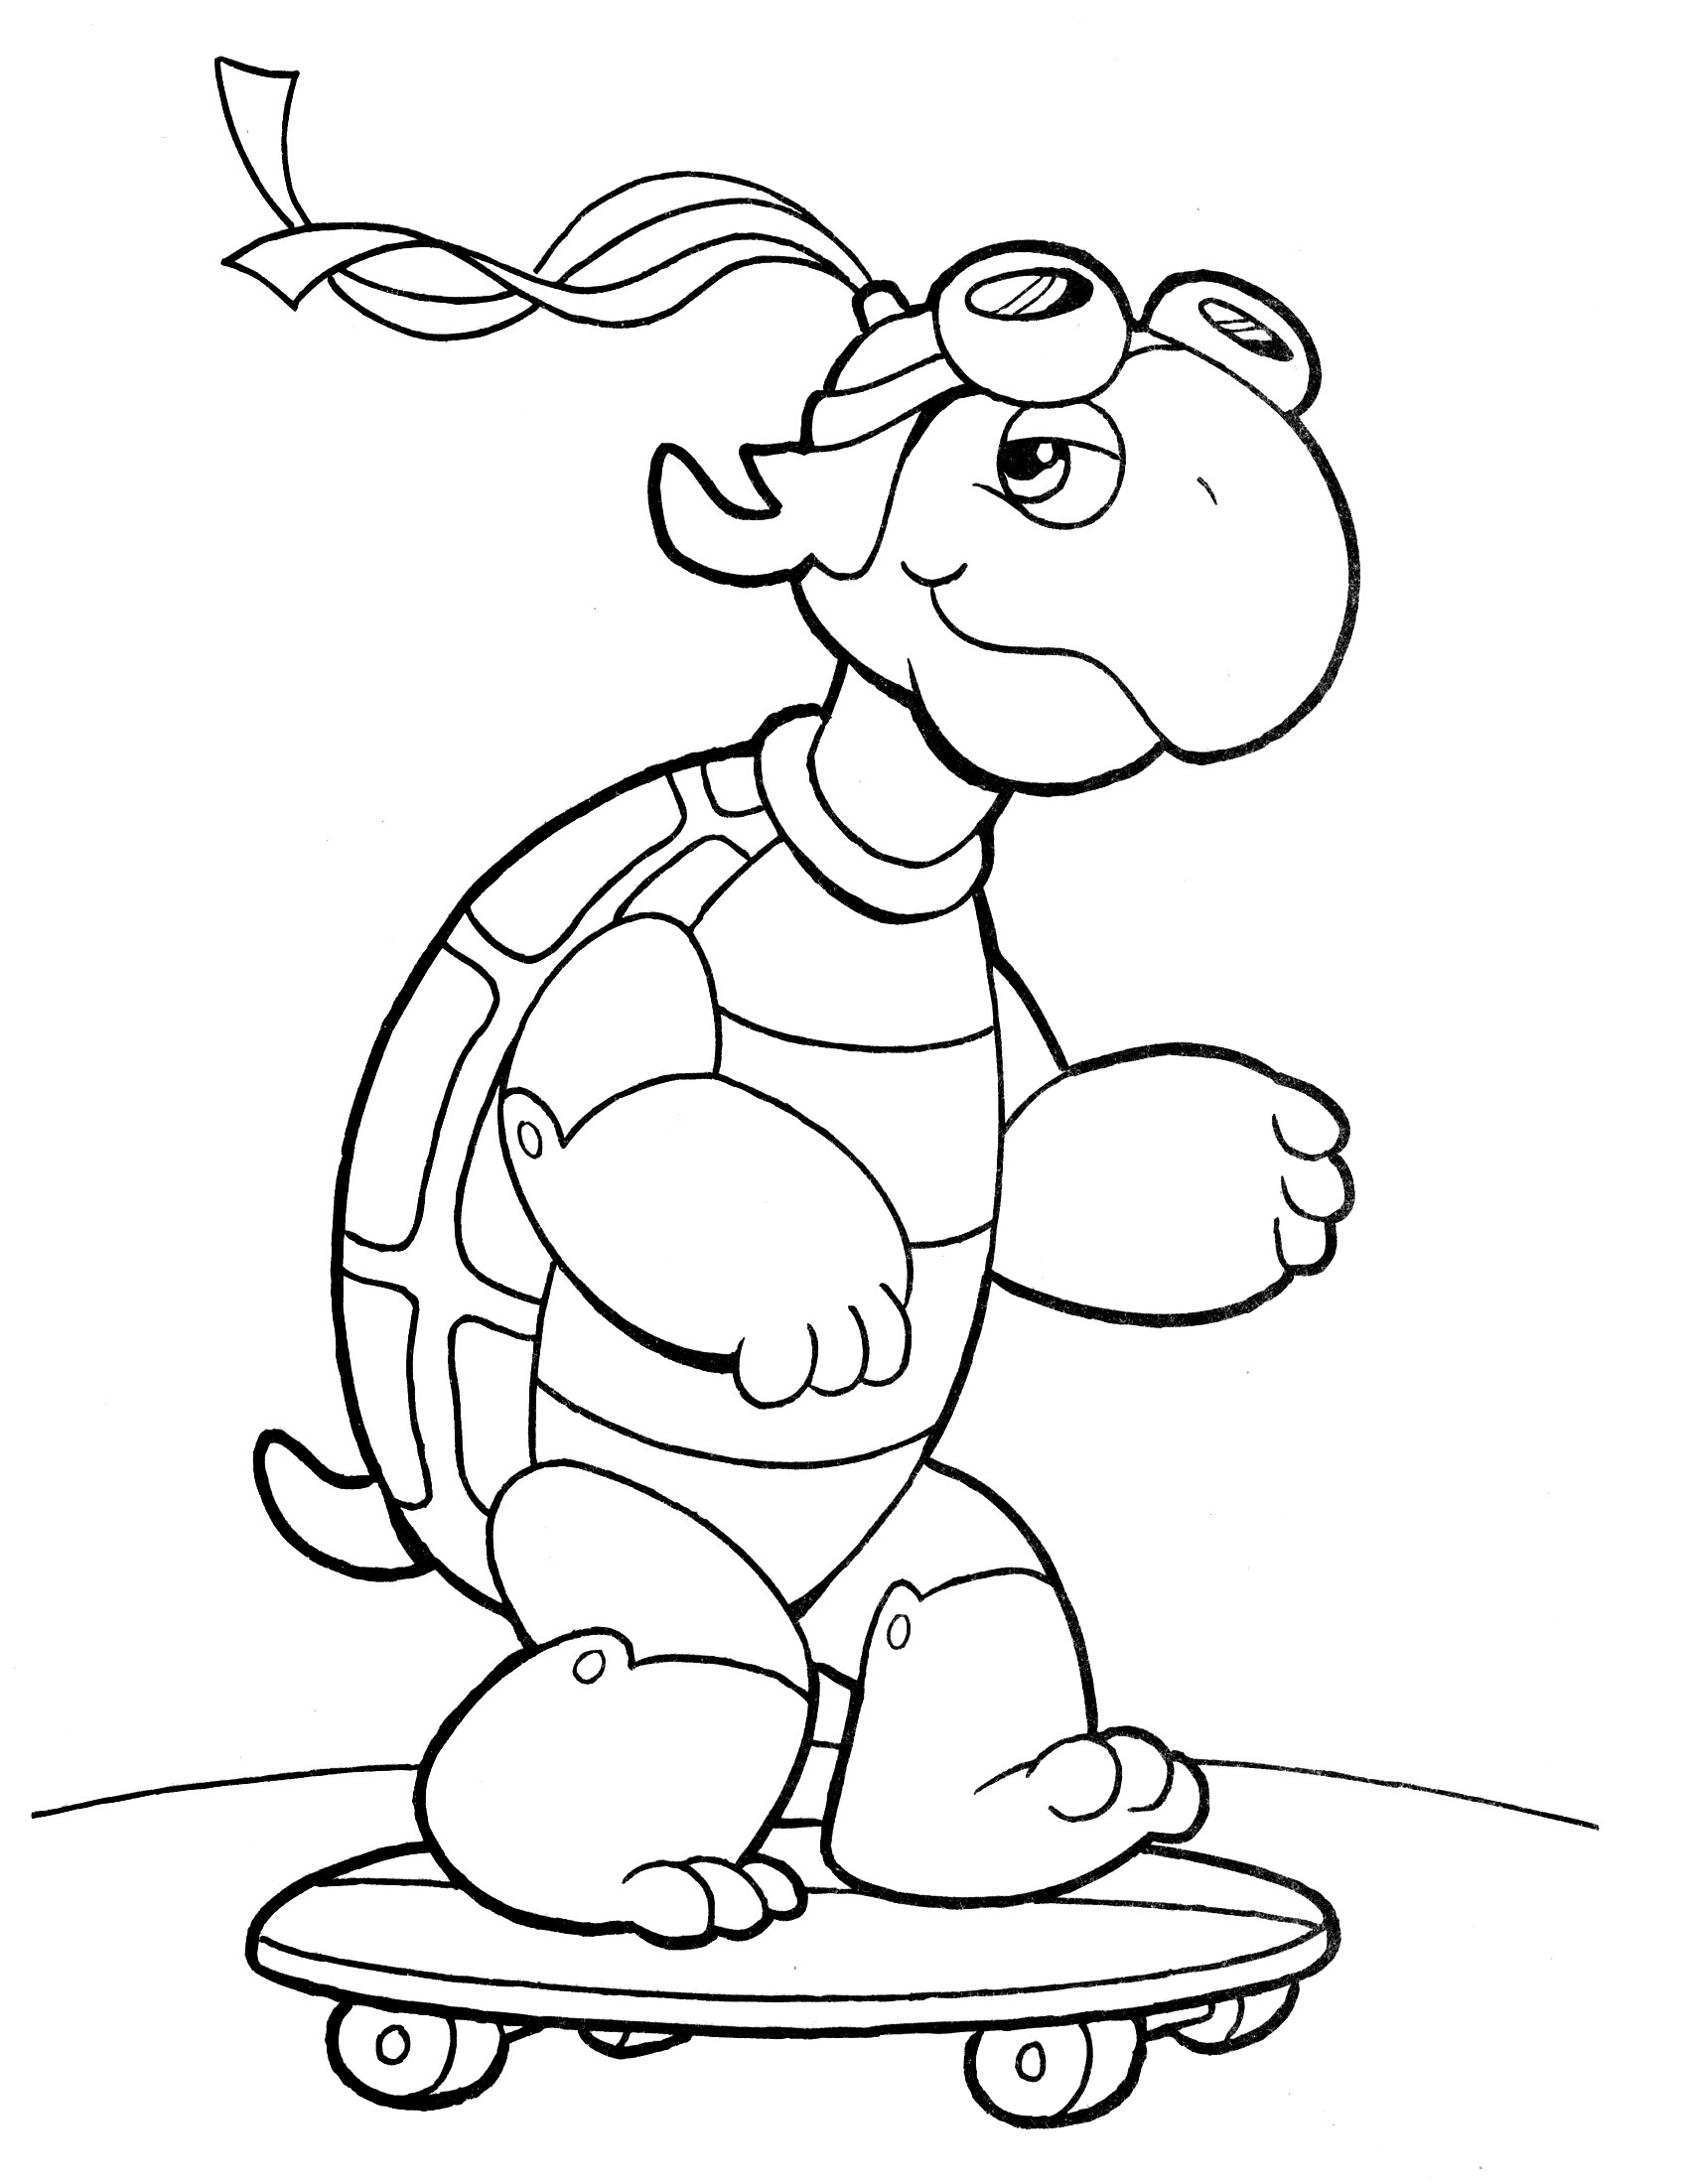 crayola-summer-coloring-pages-at-getcolorings-free-printable-colorings-pages-to-print-and